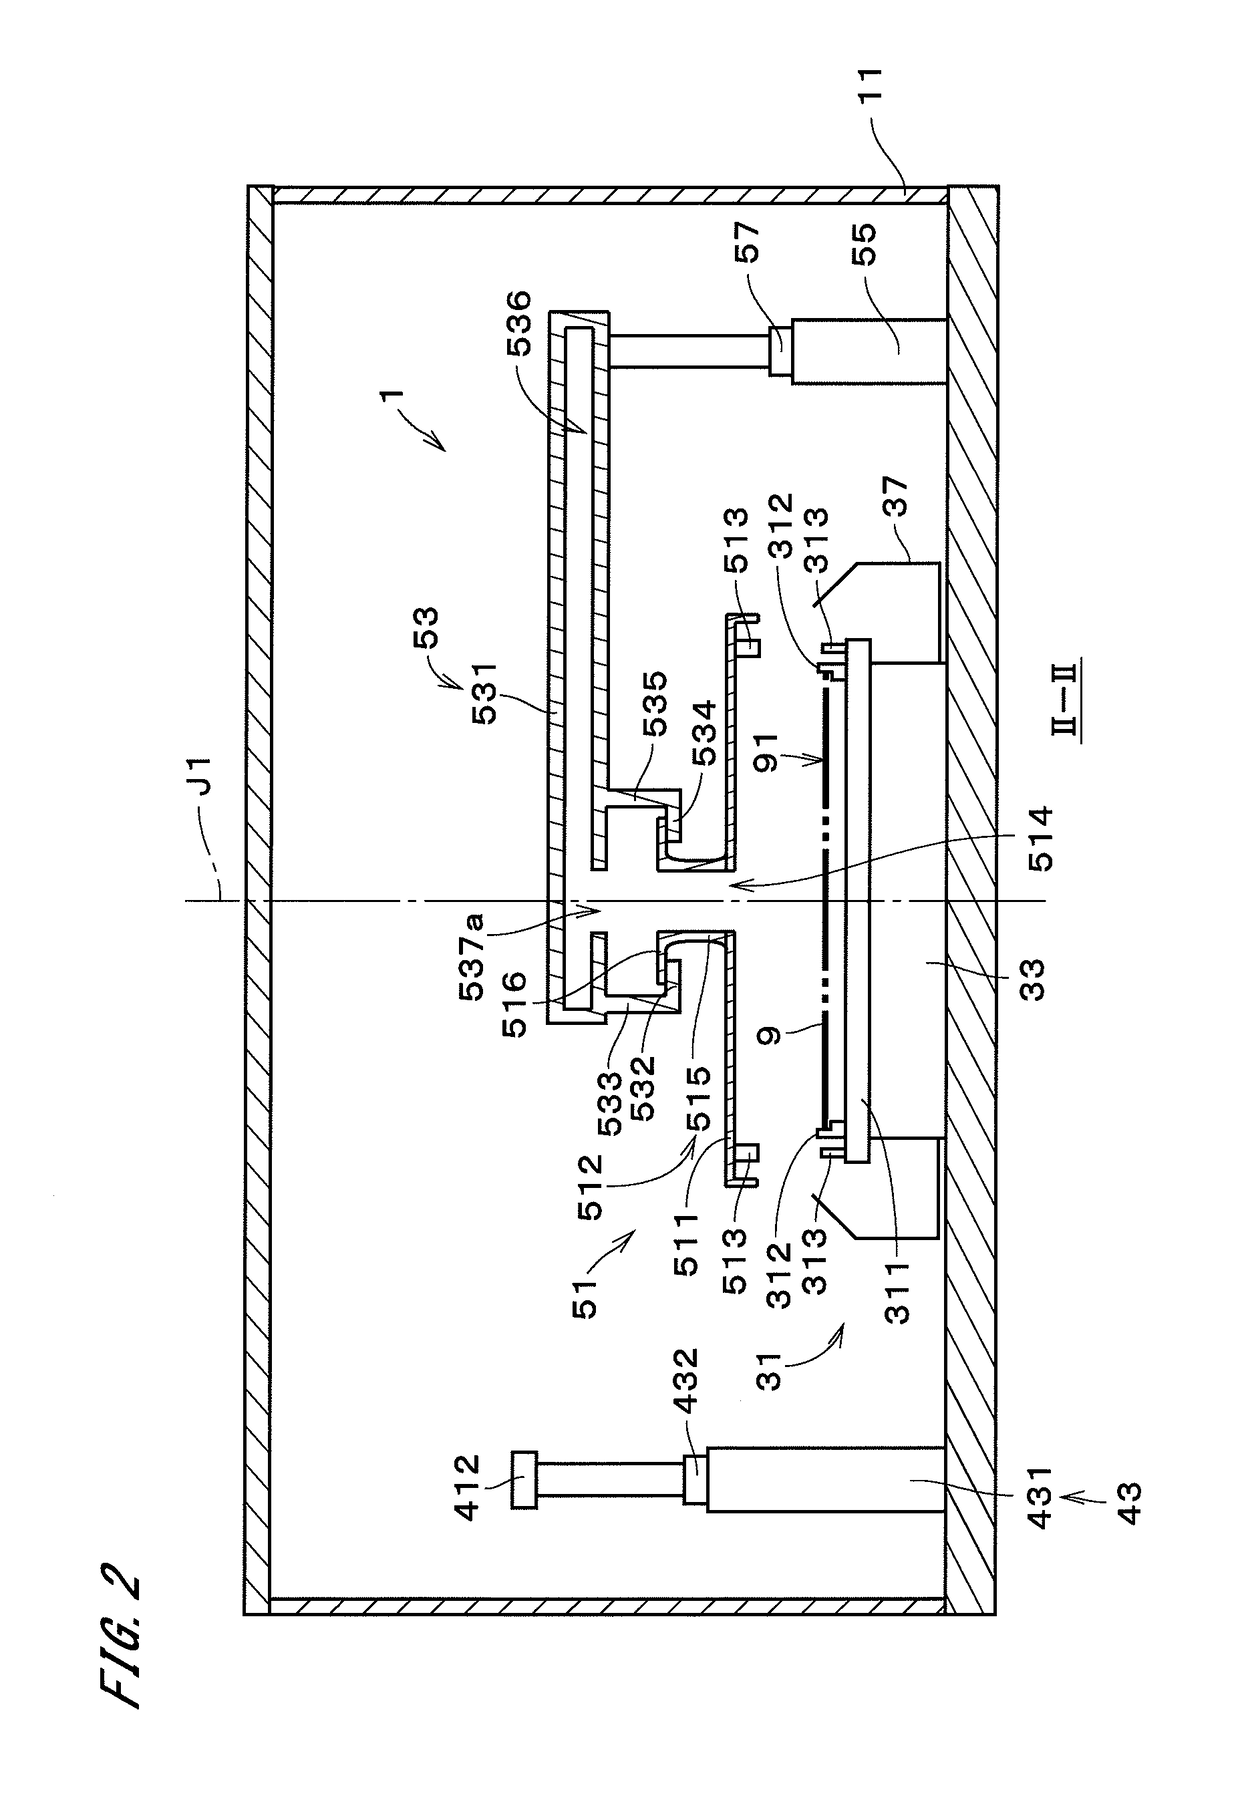 Substrate processing apparatus, substrate processing system, and substrate processing method